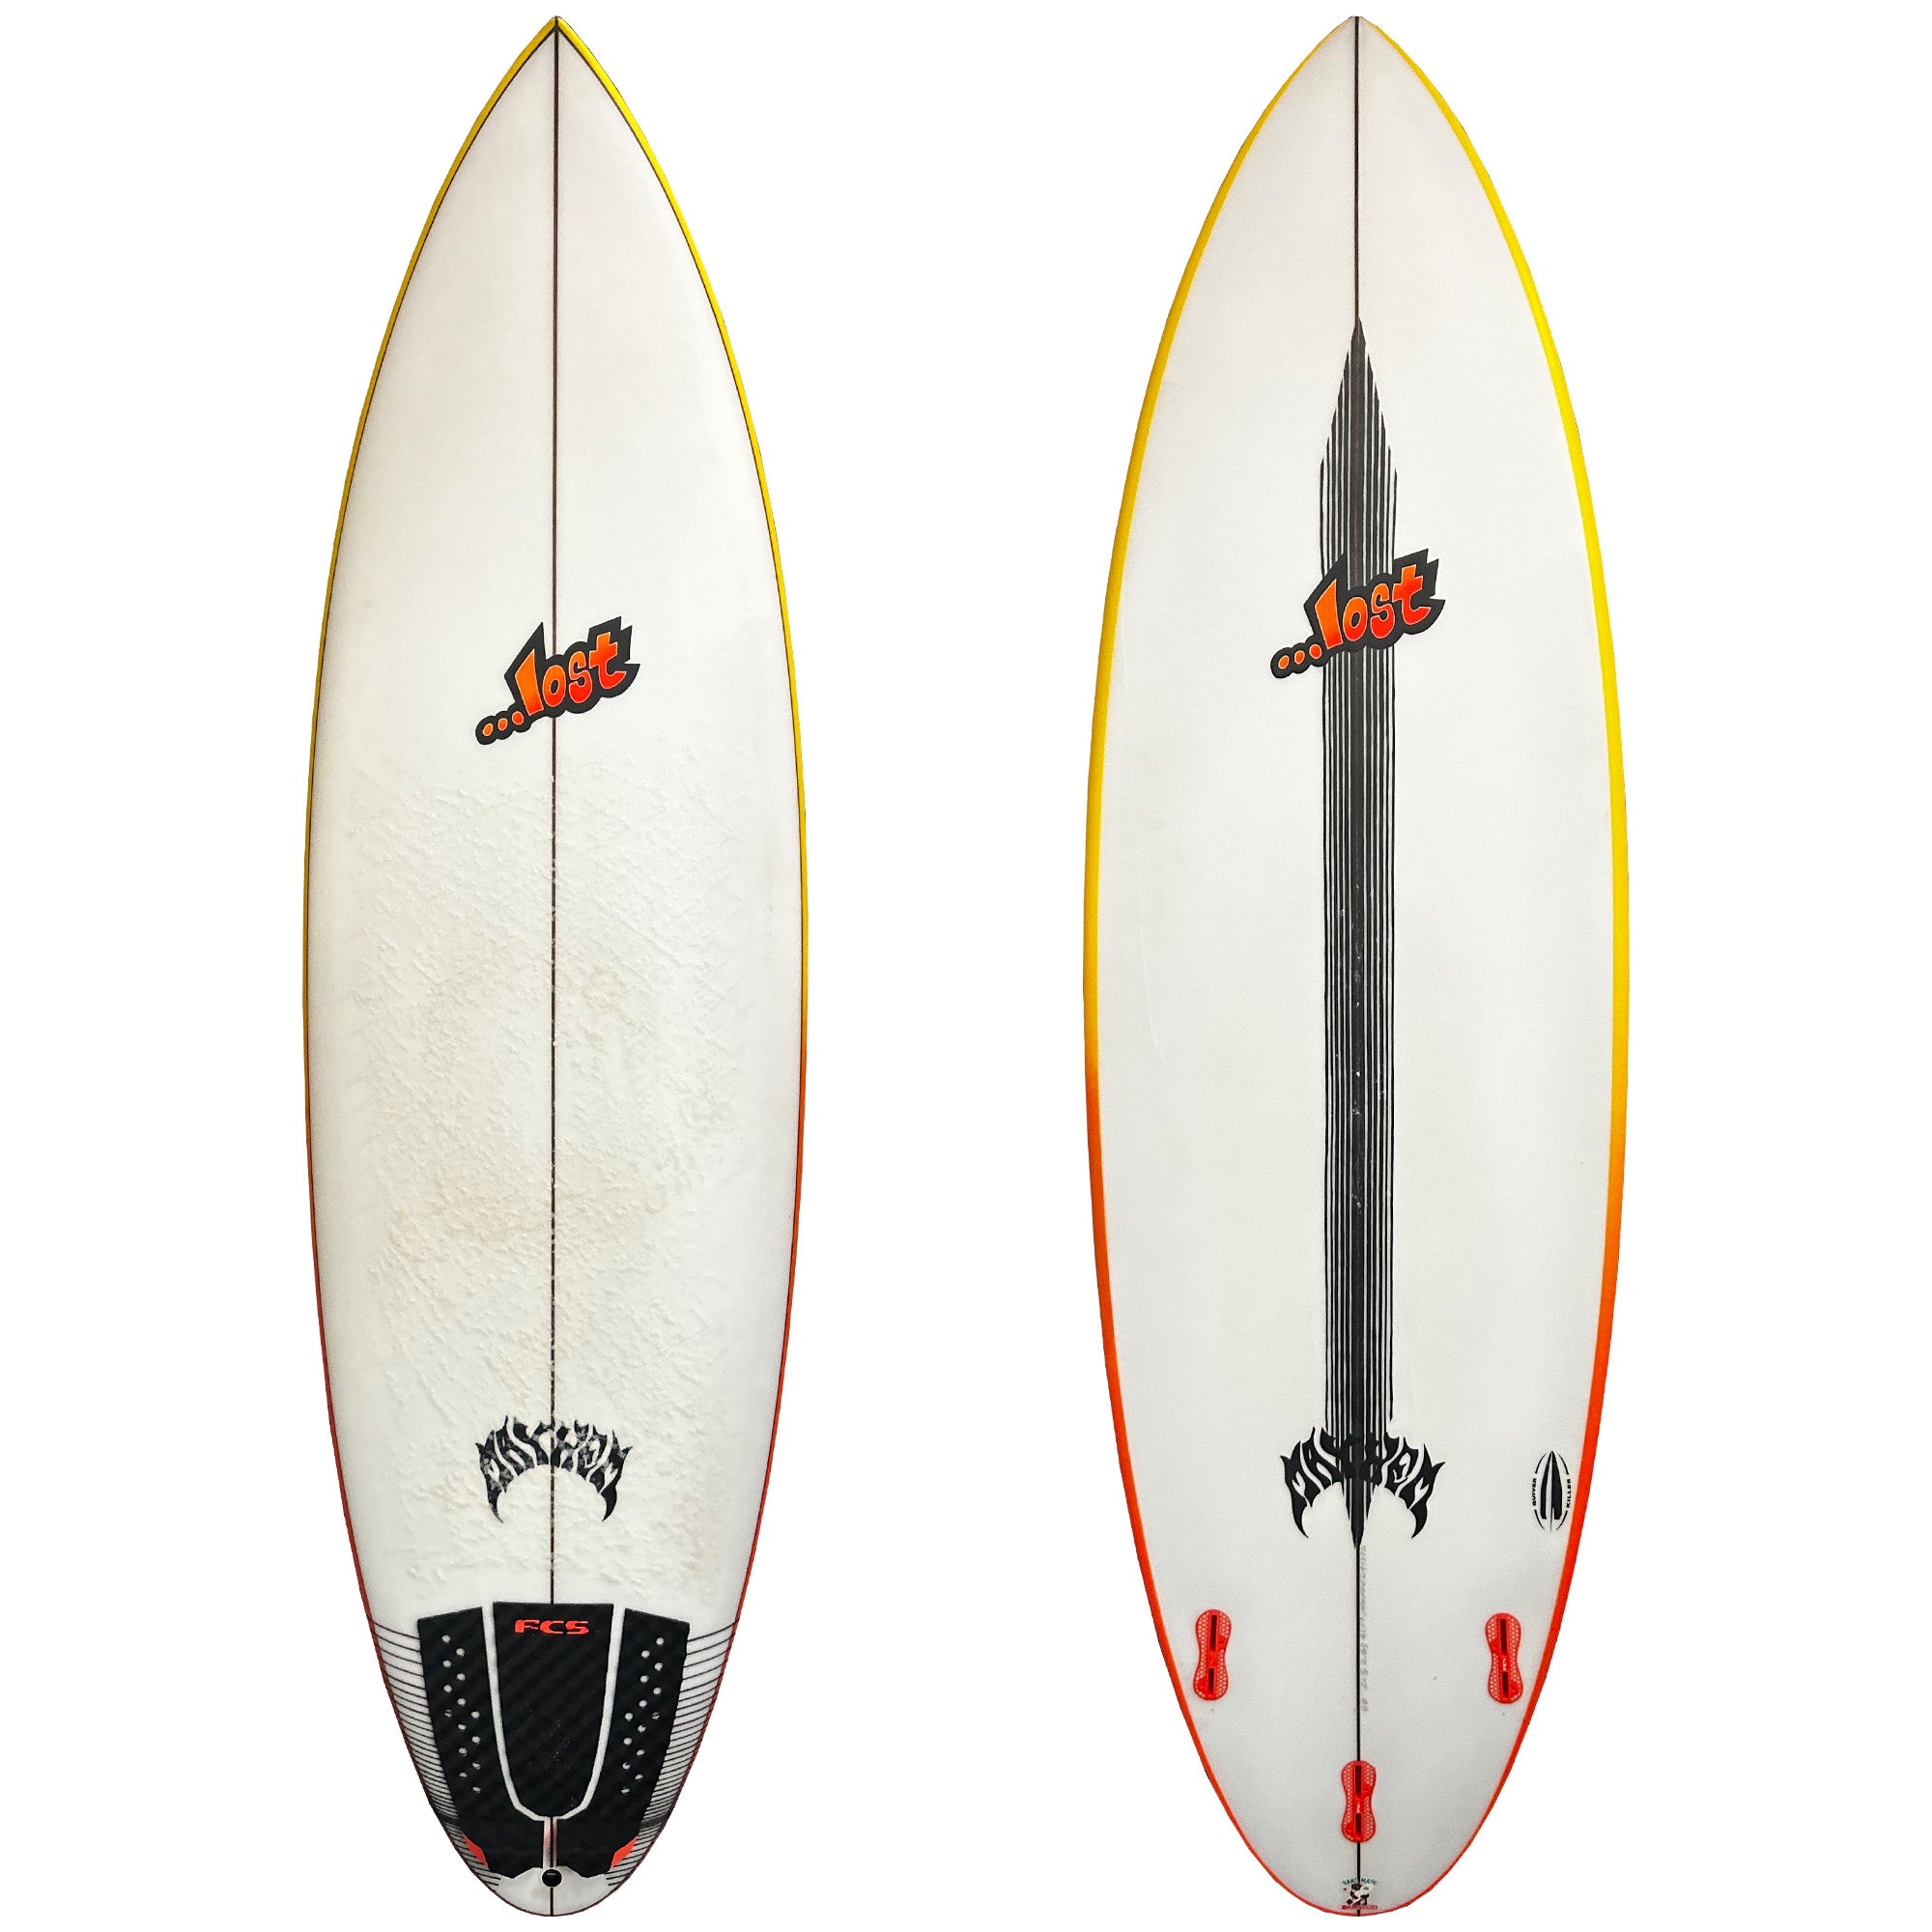 Lost Quiver Killer 6'6 Consignment Surfboard